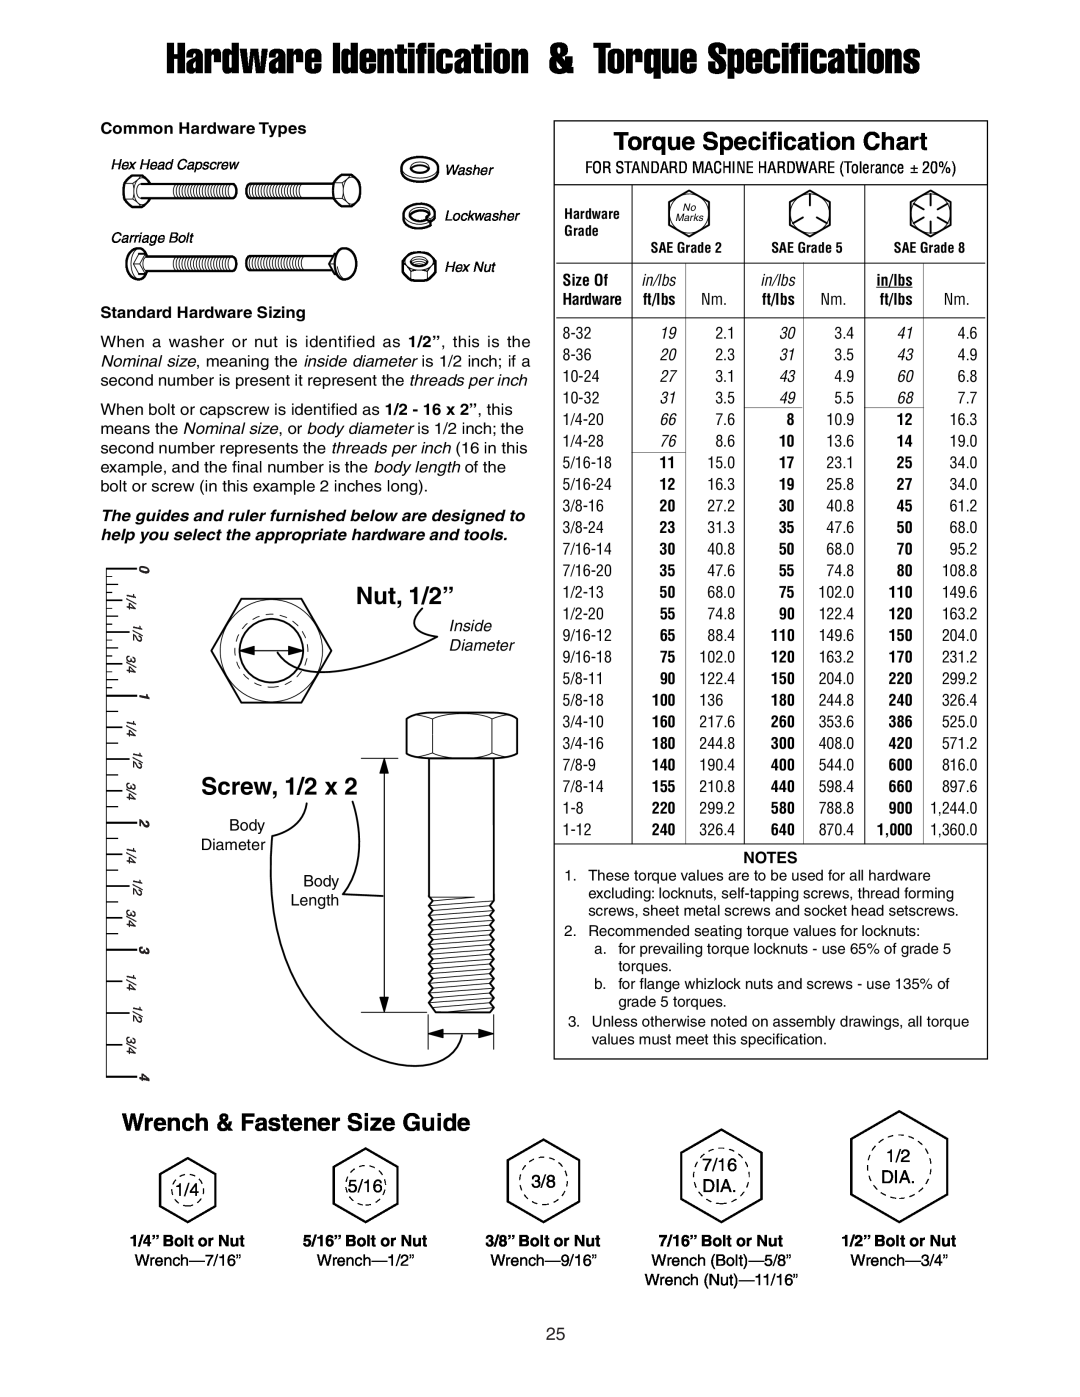 Snapper 1694150 manual Torque Specification Chart, Hardware Identification & Torque Specifications, Nut, 1/2”, Screw, 1/2 